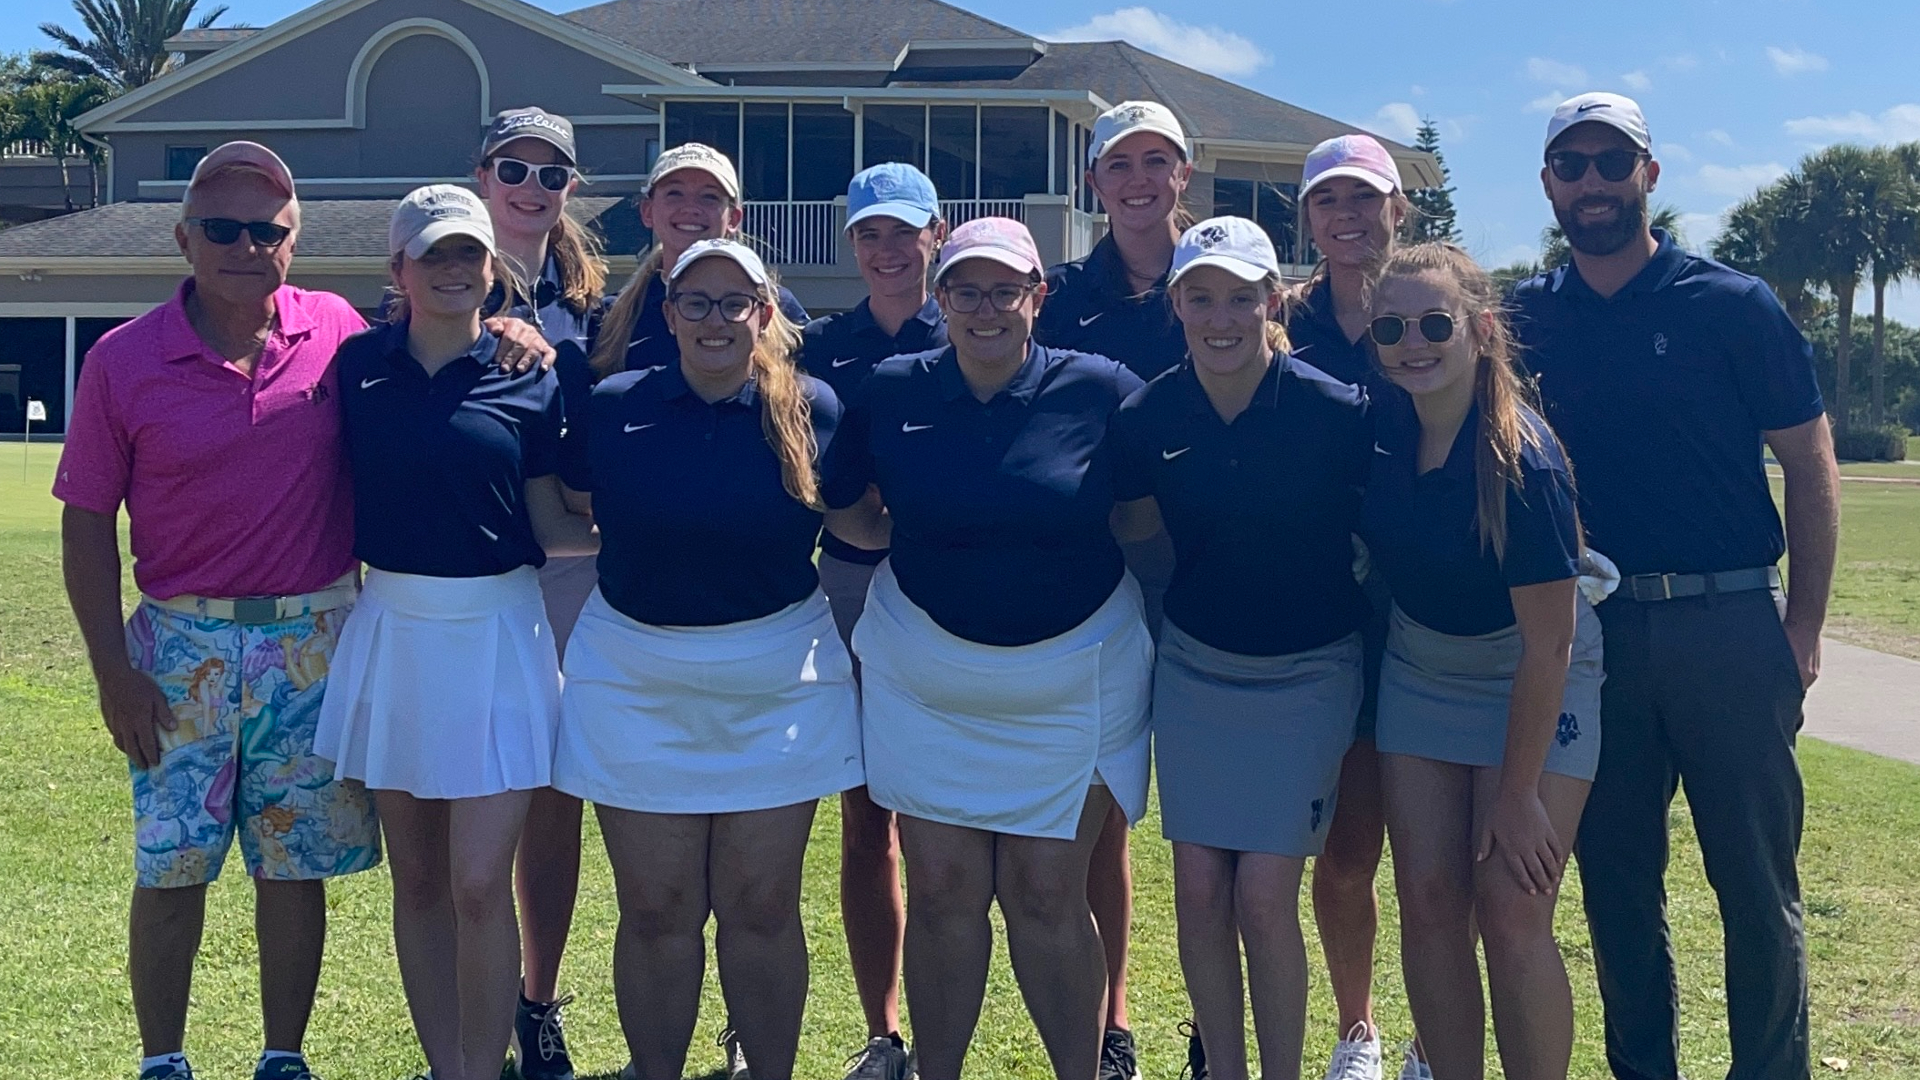 Augustana clips St. Ambrose 6-4 in match play competition